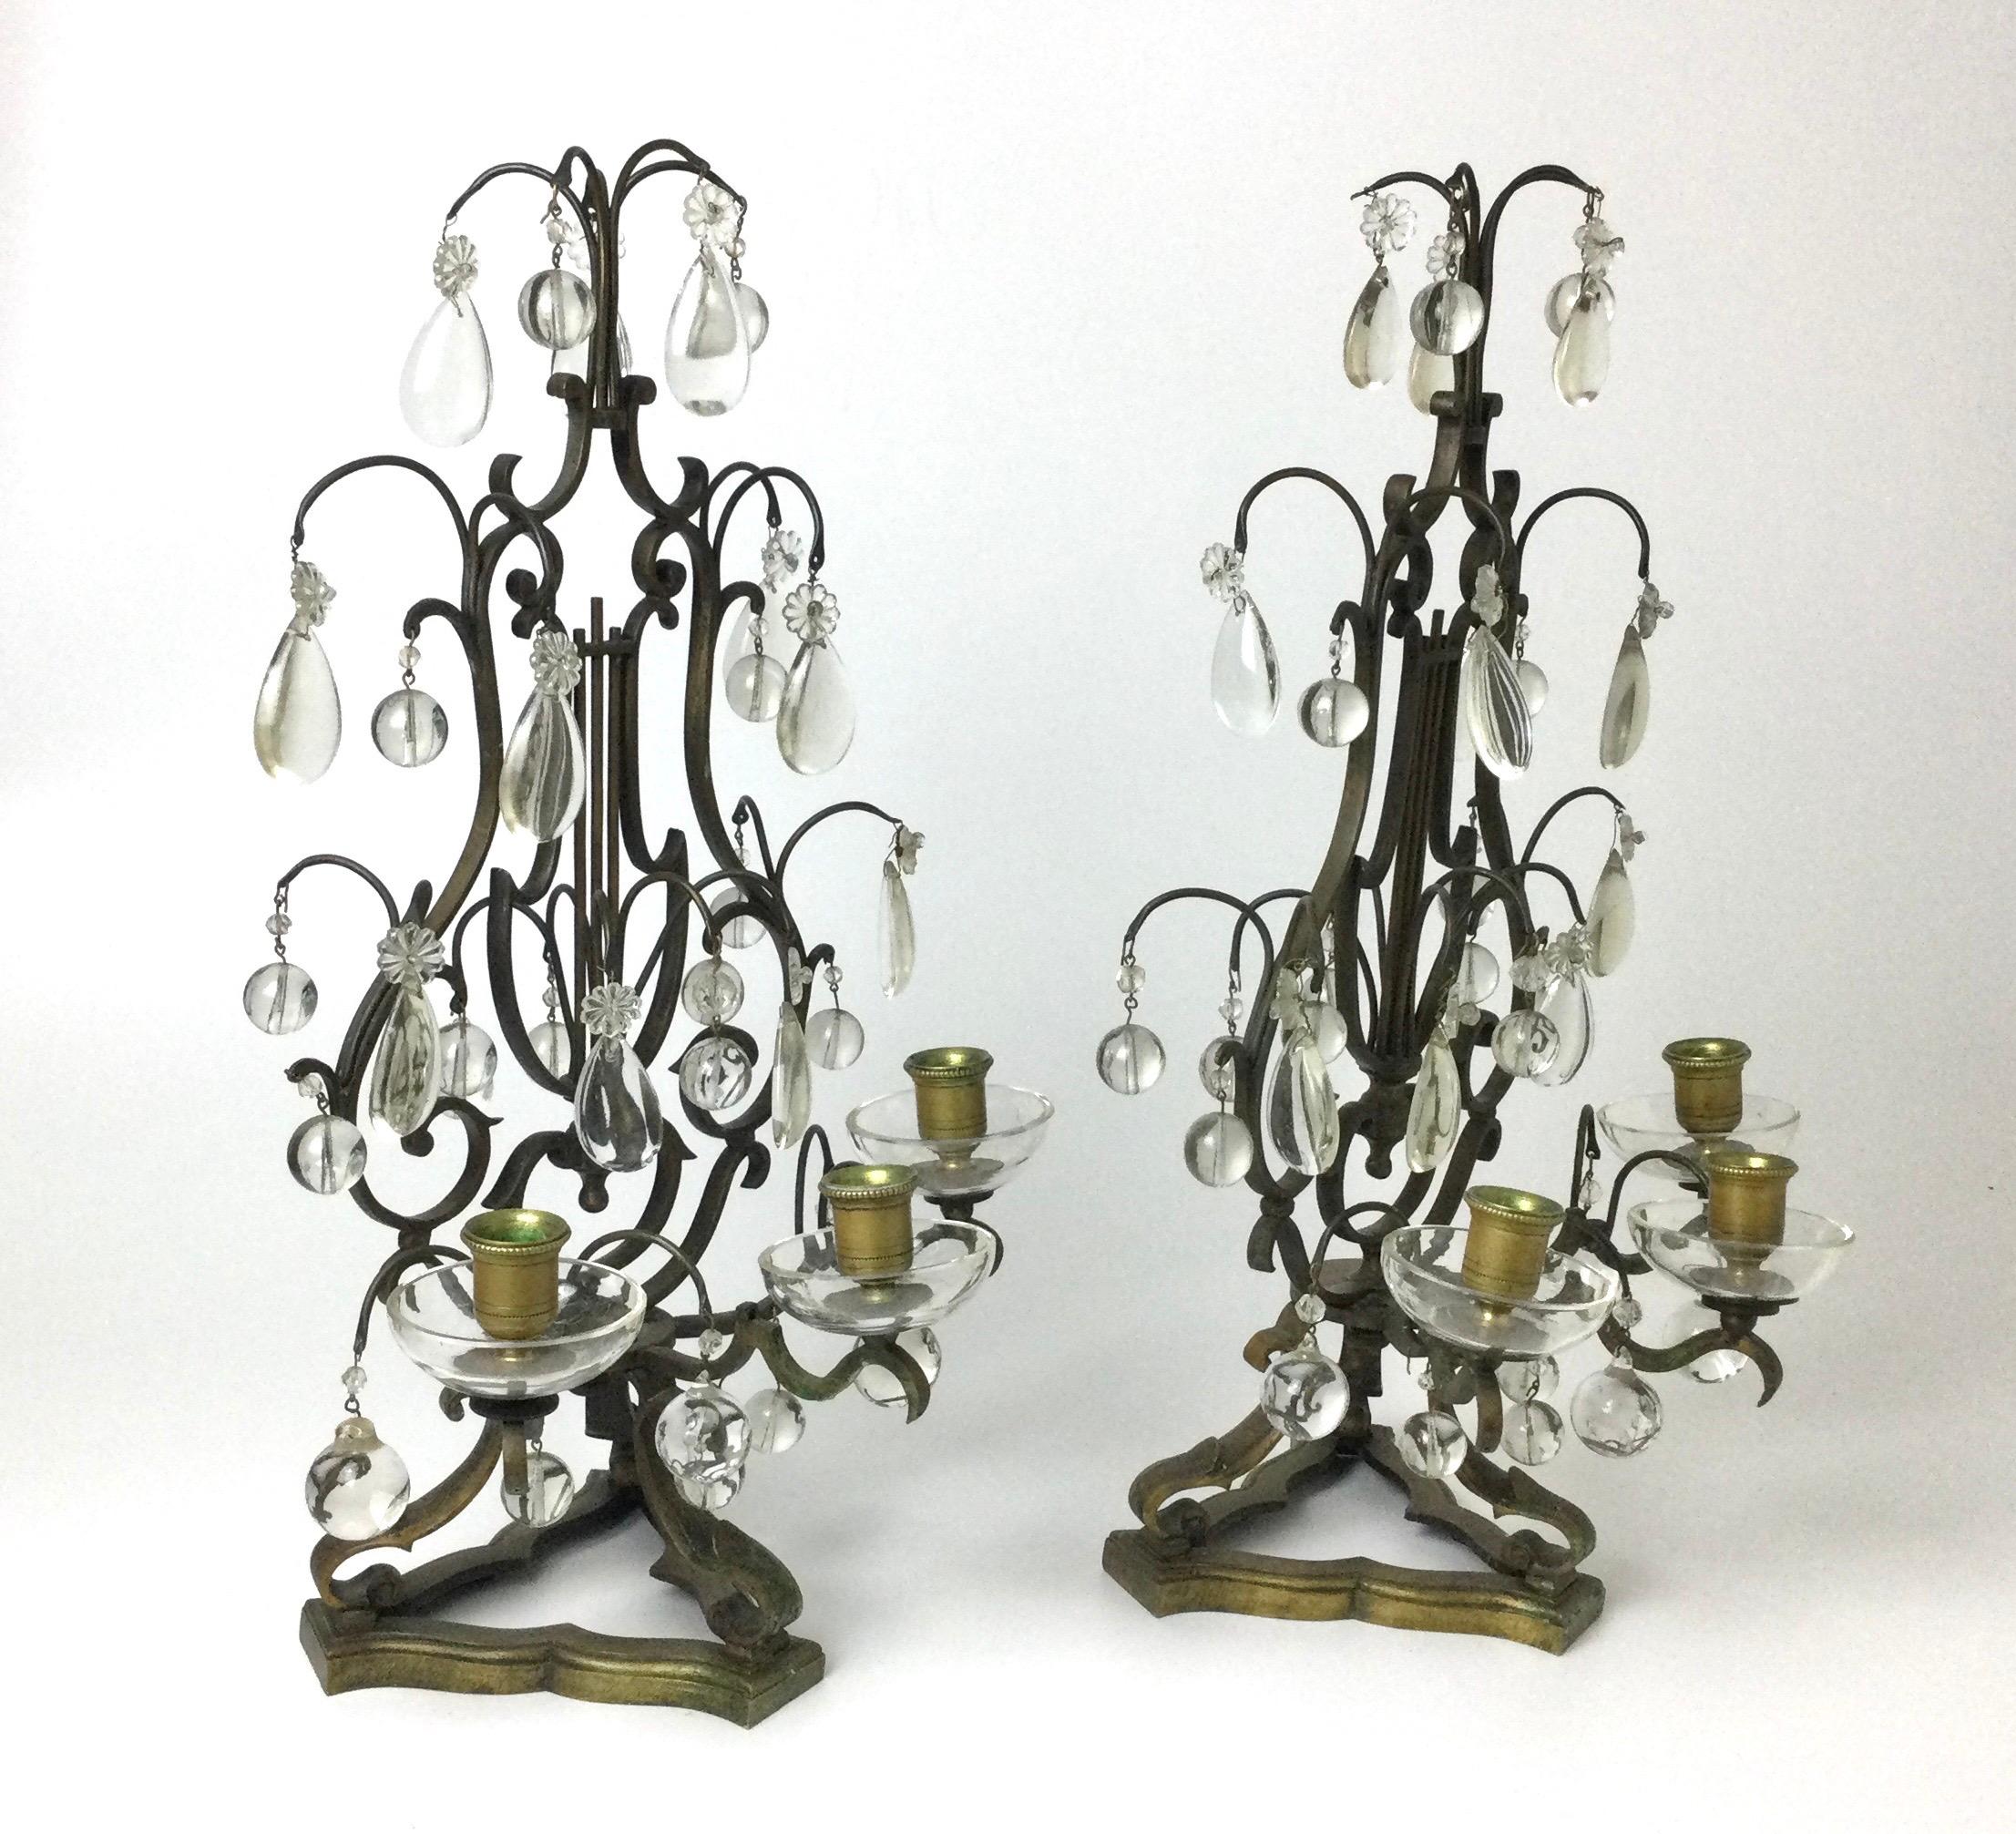 Wonderful pair of three light candleholder candelabras. Bronze lyre form full of crystals. There are 3 open holes on the bottom of each to possibly? Hang more crystals from. Plucked from a large mantel in Norther NJ several years ago. Measures: 11